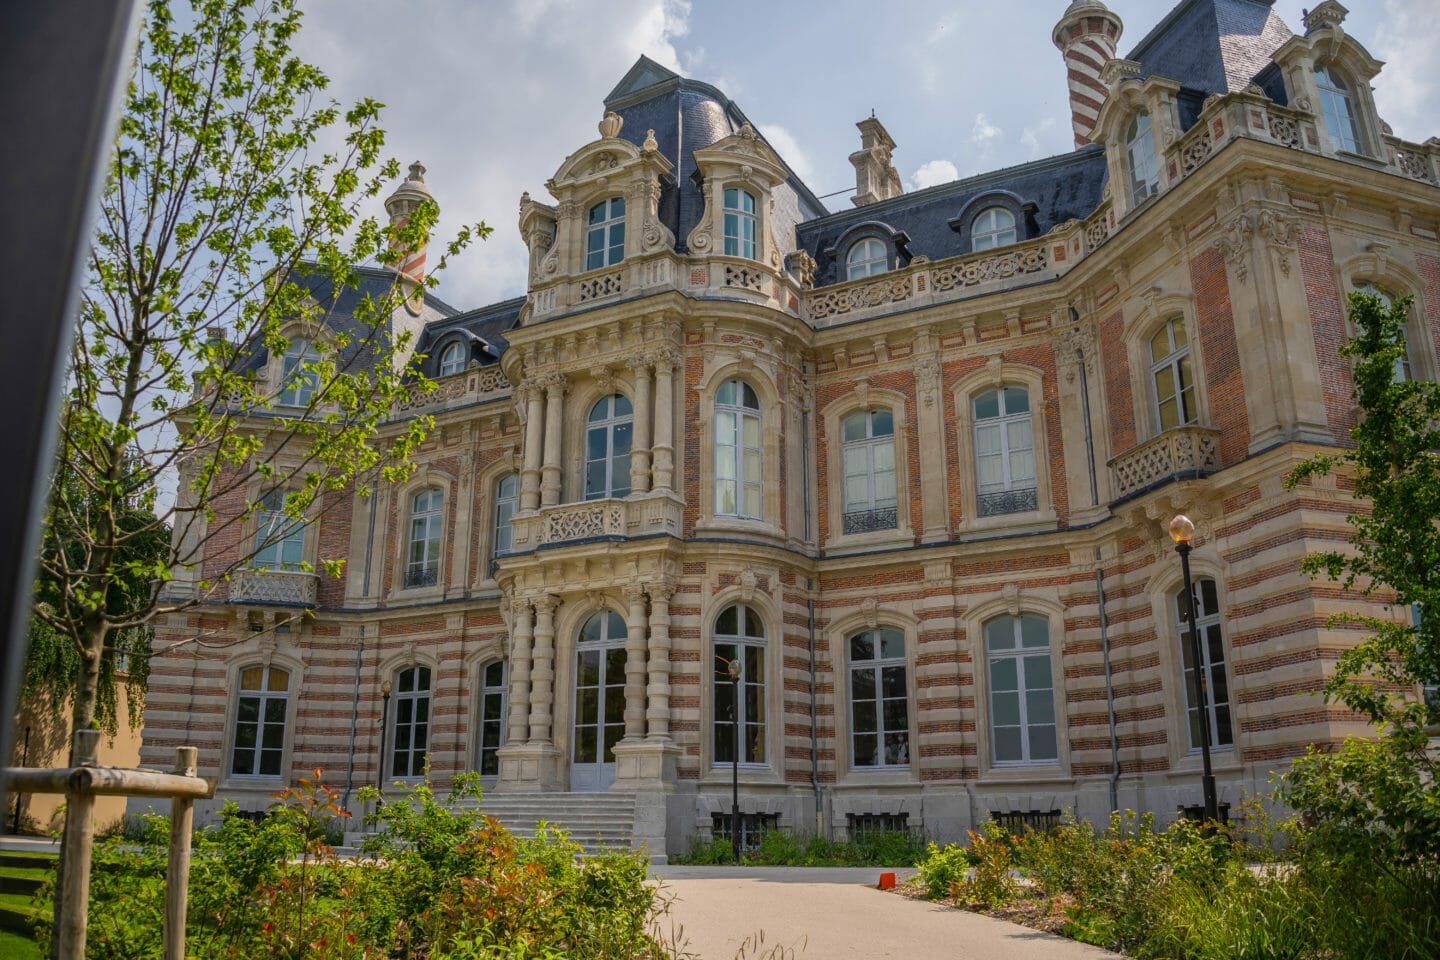 Epernay visit the museum of Champagne on the champagne avenue